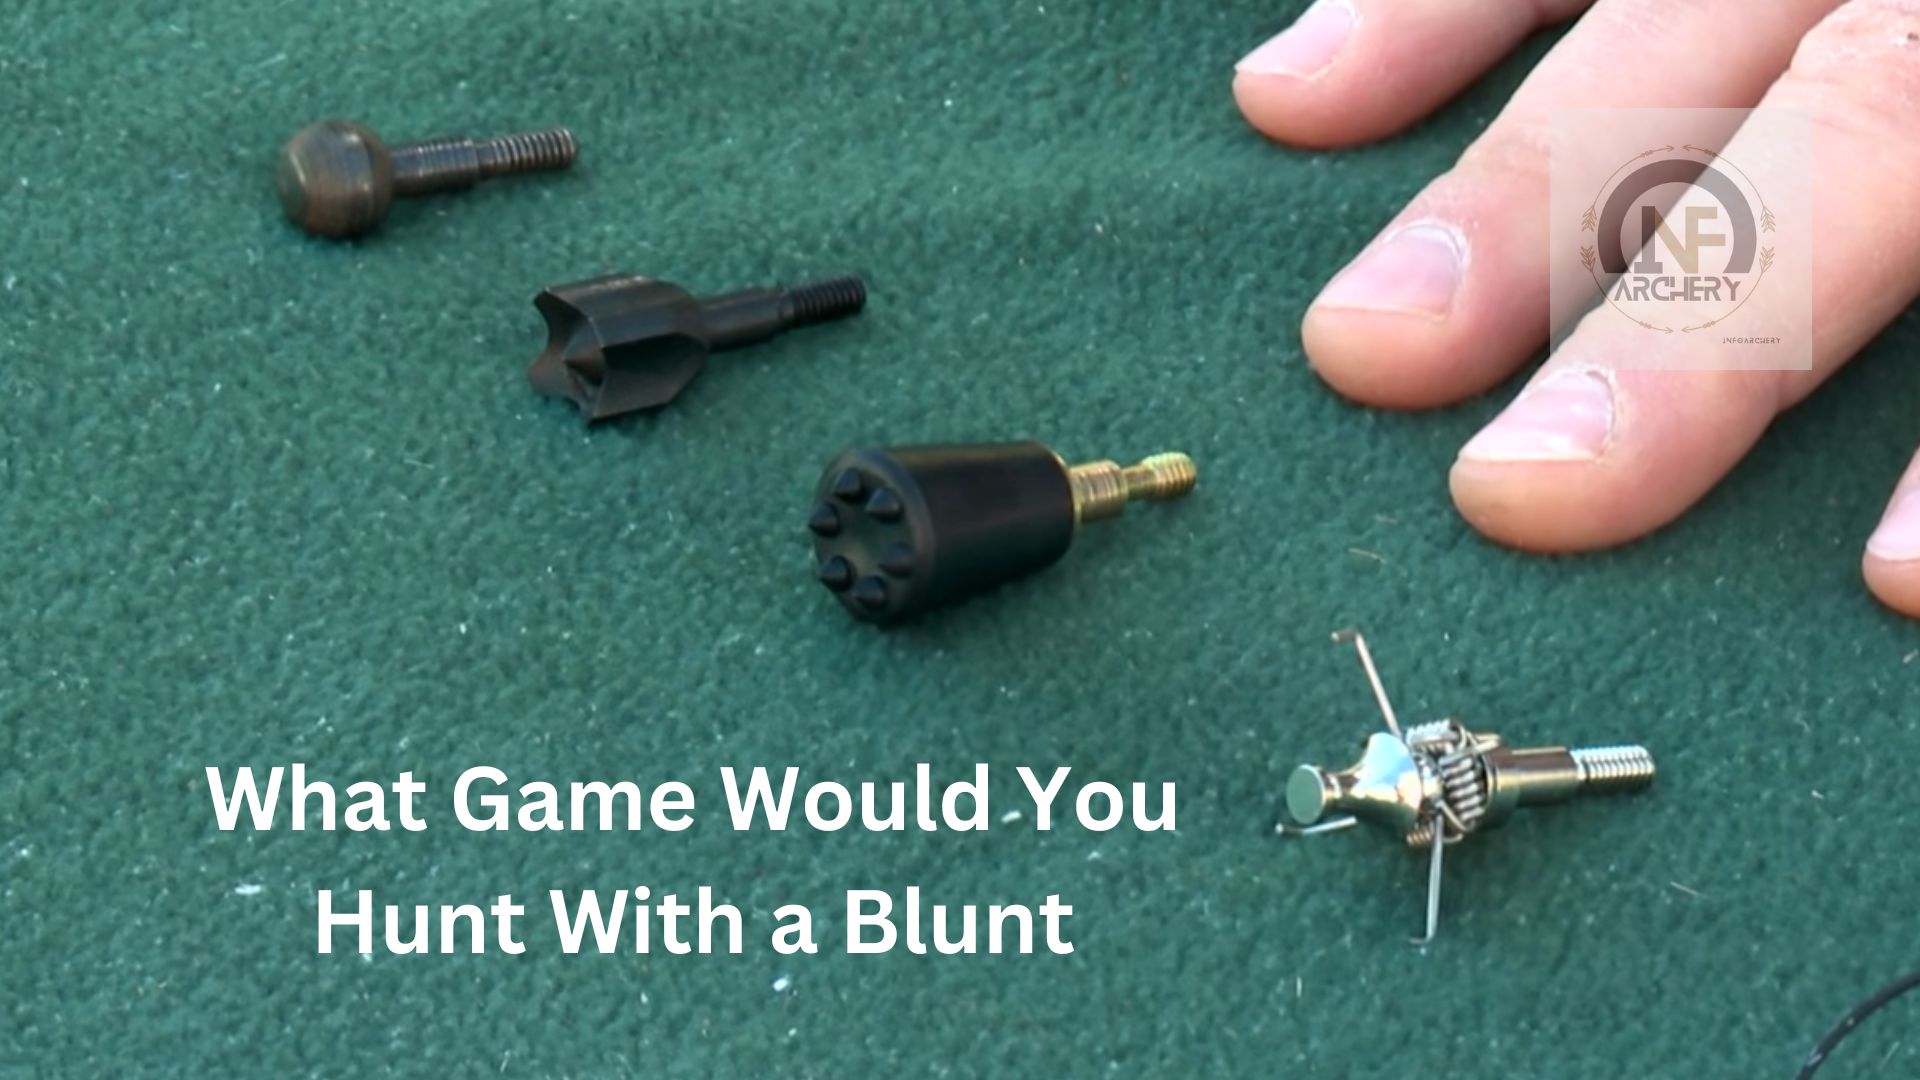 What Game Would You Hunt With a Blunt